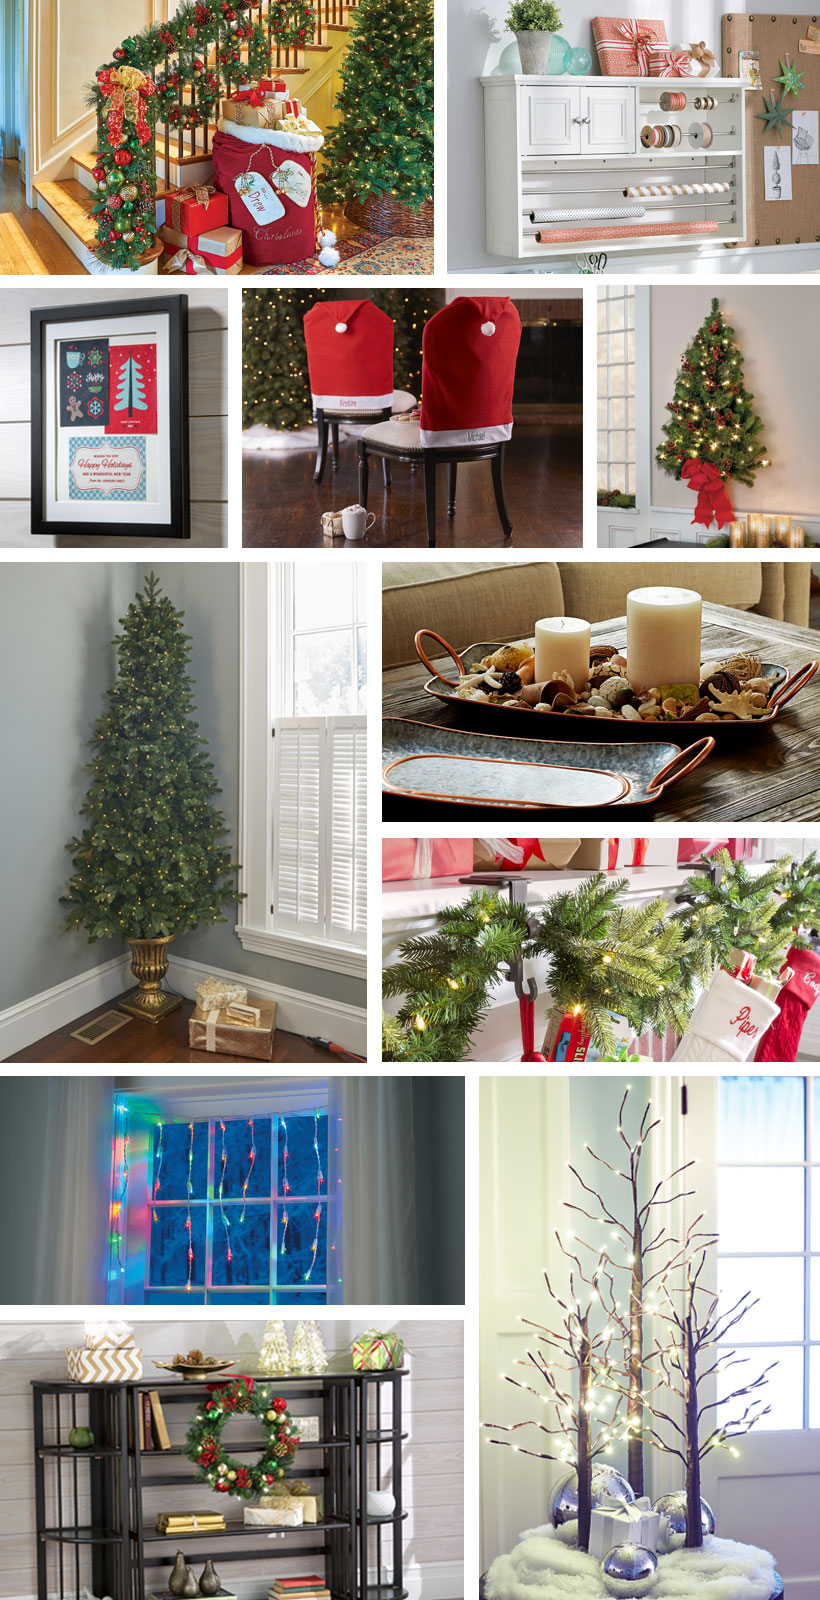 How to Decorate Small Spaces for Christmas and Make Them Cozy